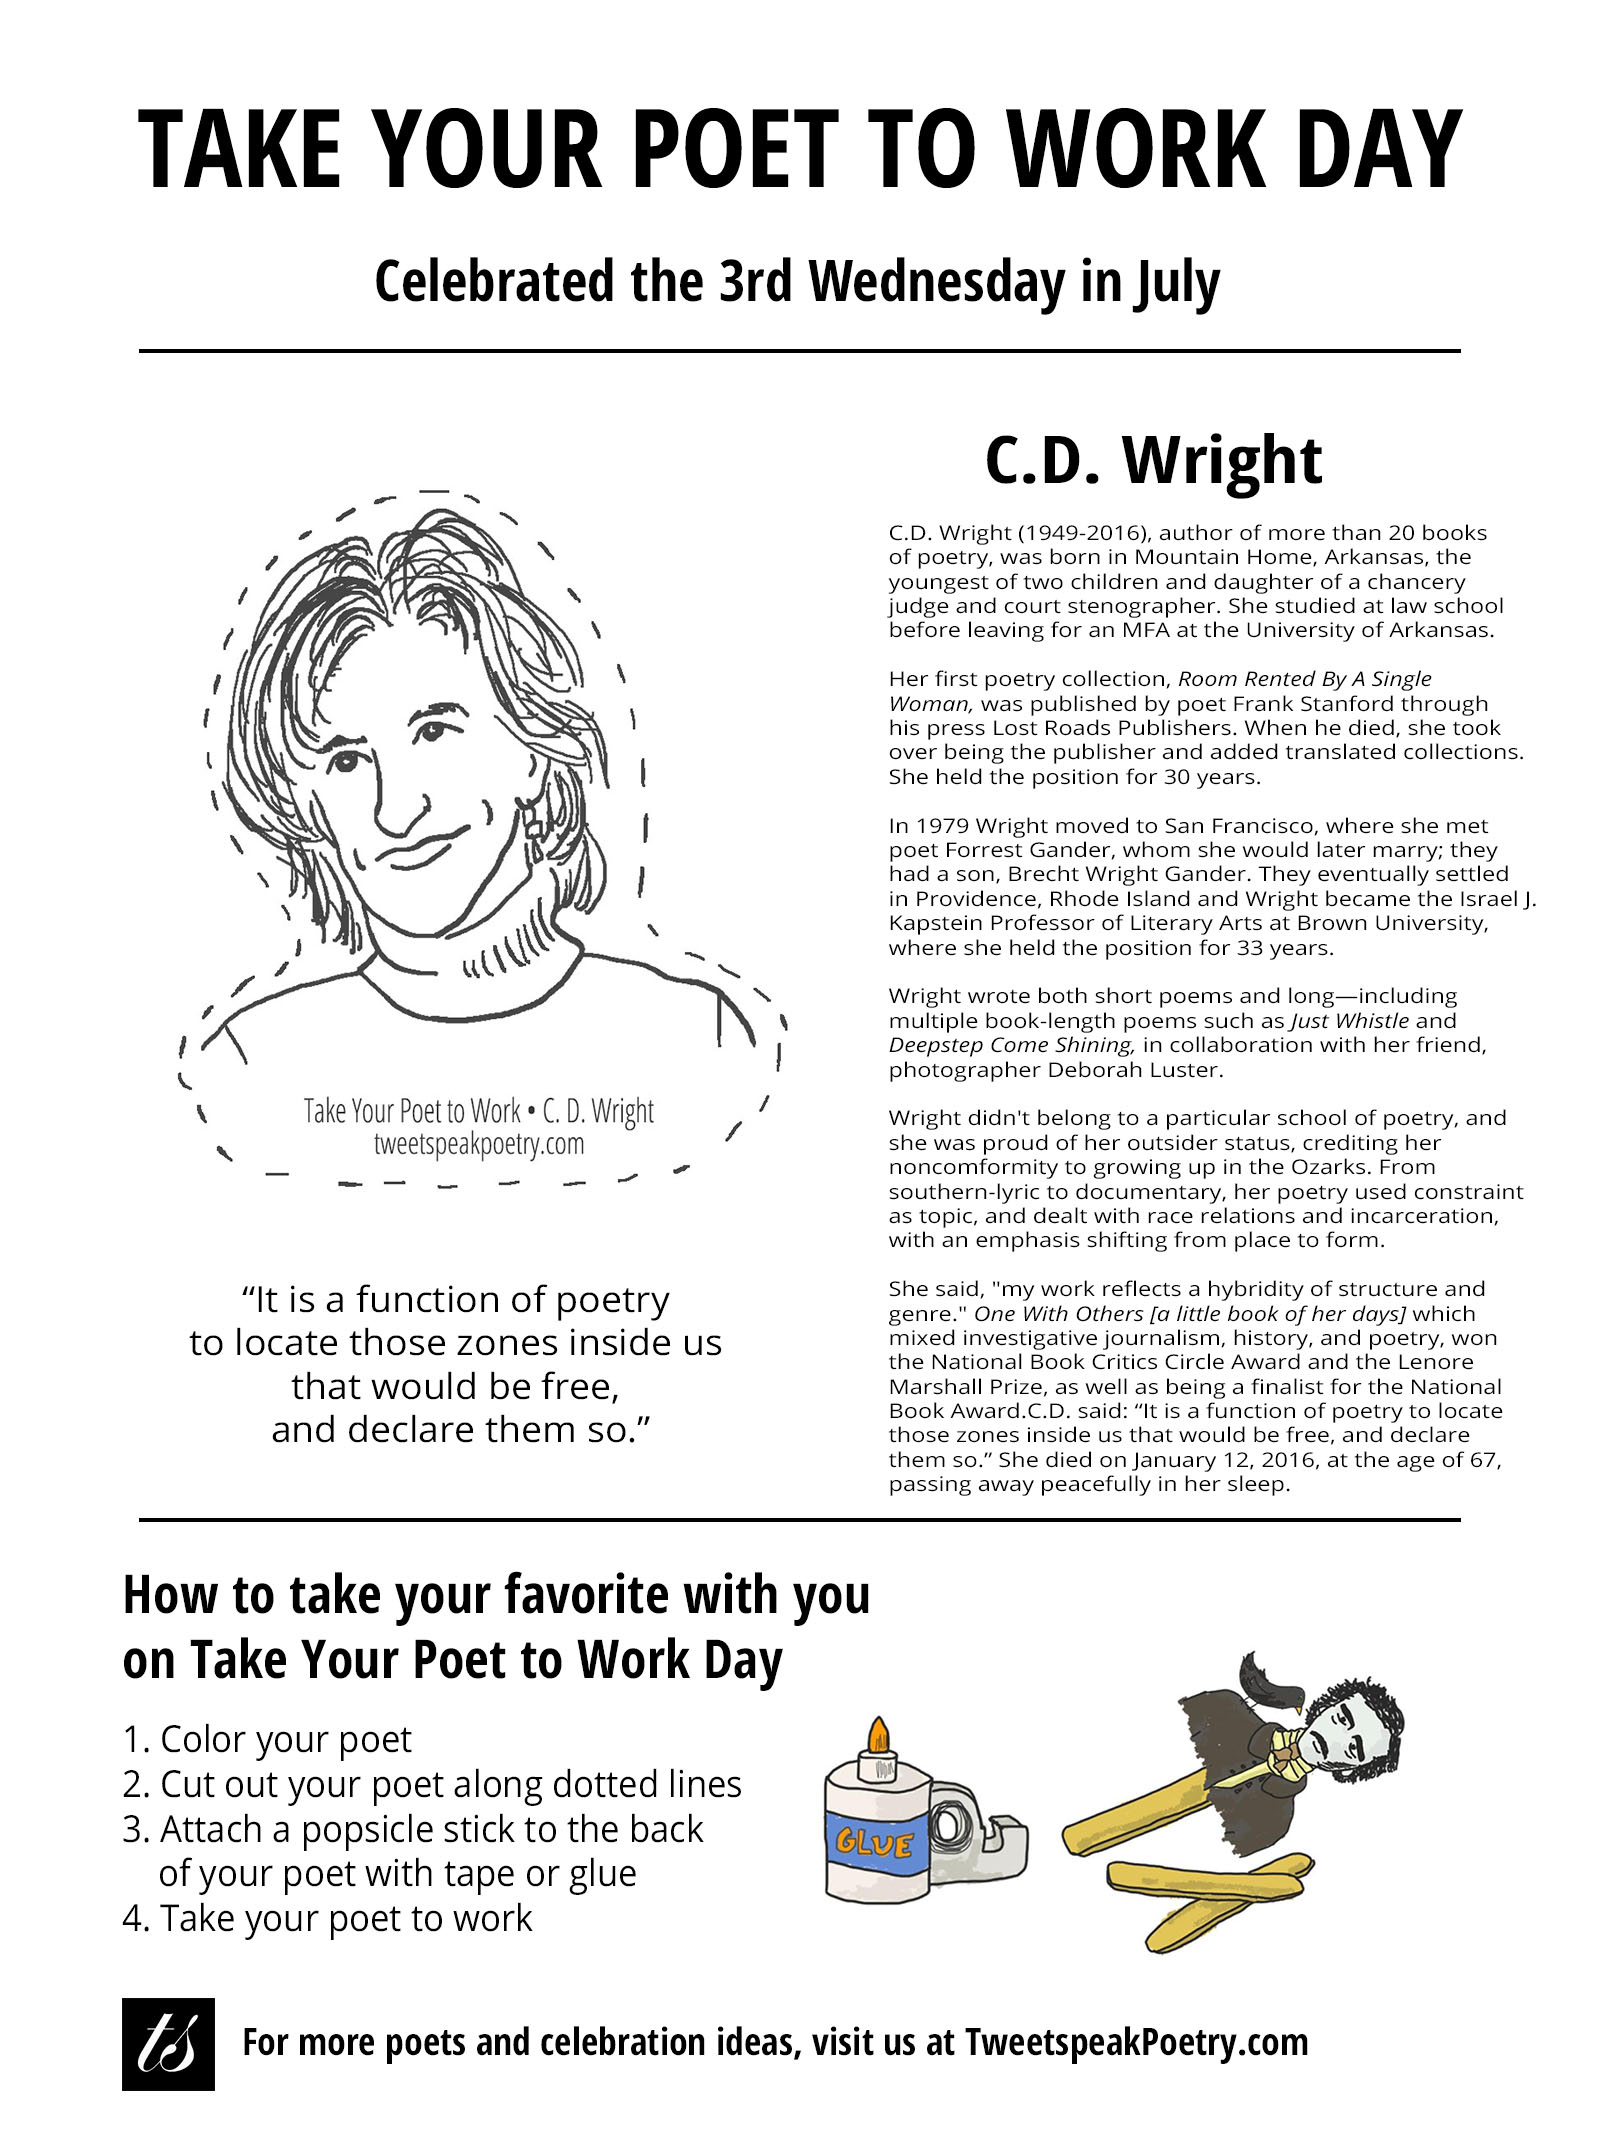 Take Your Poet to Work C.D. Wright 2